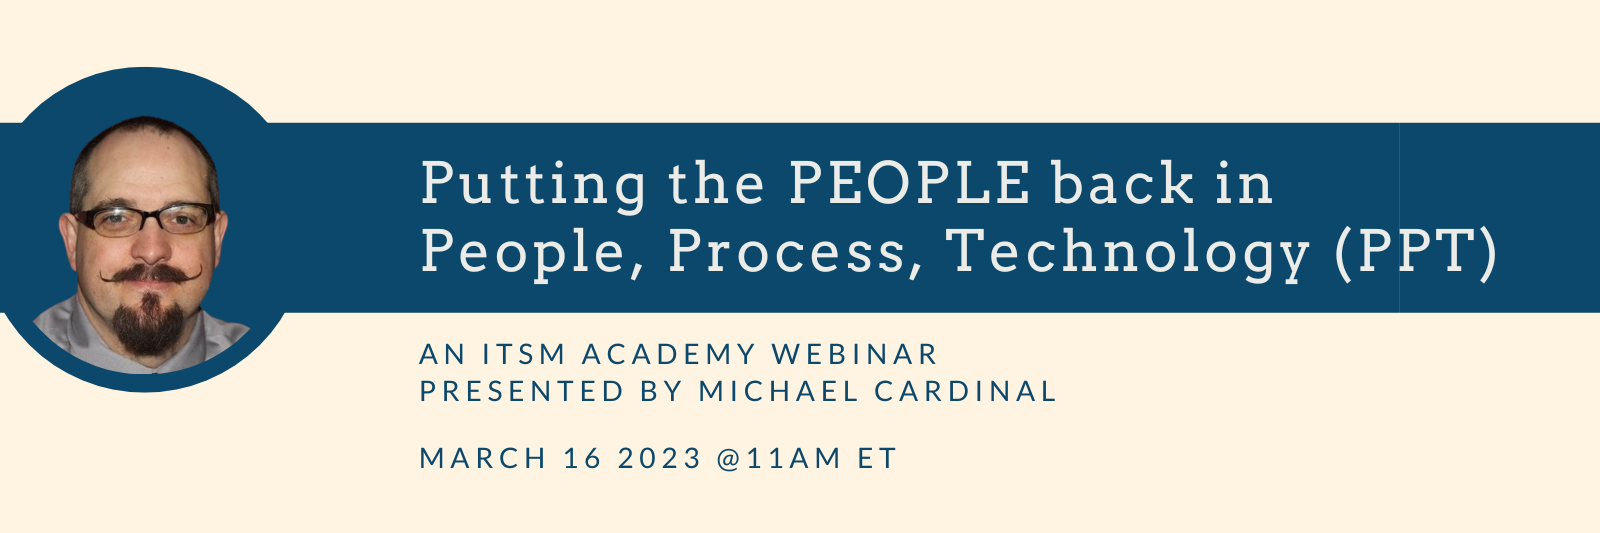 Putting the People back in PPT - Mike Cardinal, Thirdera